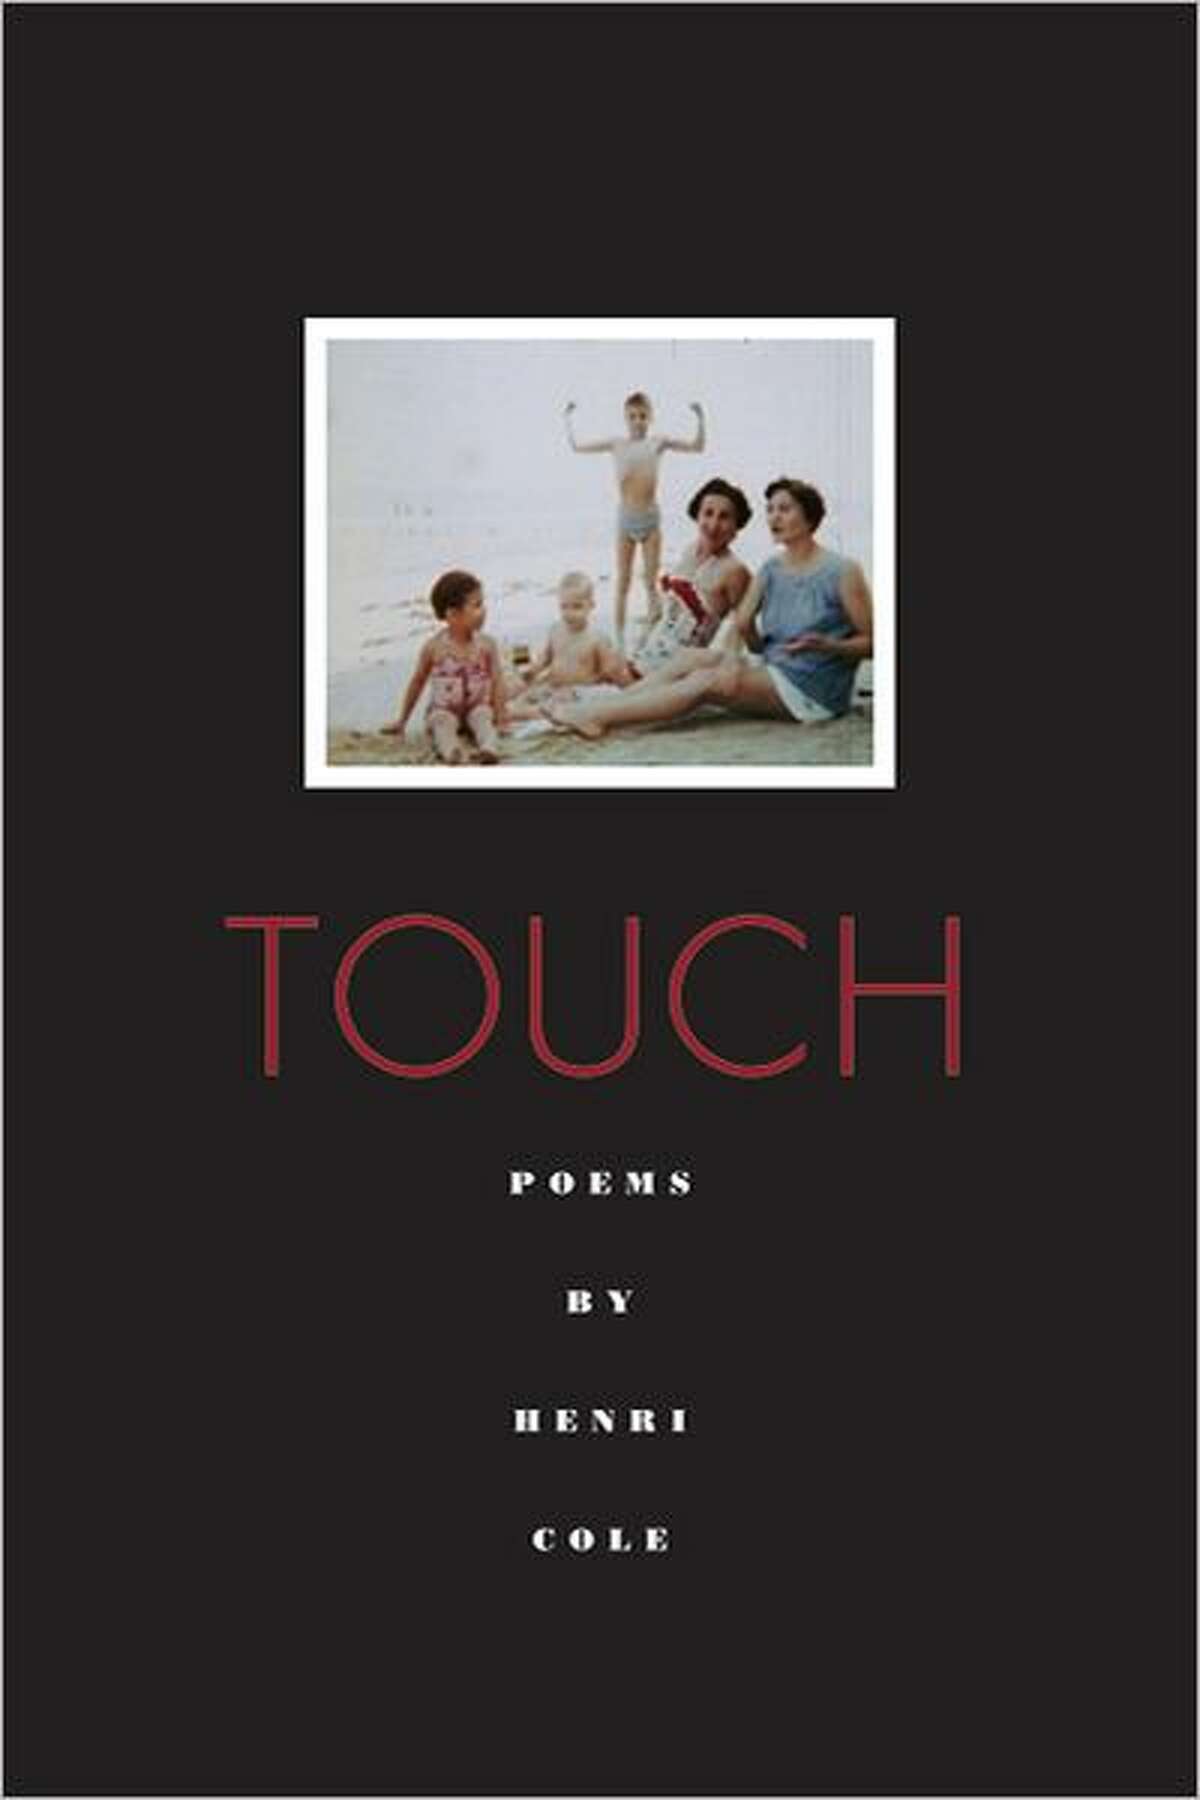 Cover image of poetry collection Touch, by Henri Cole; $23 Product Details Hardcover: 80 pages Publisher: Farrar, Straus and Giroux (September 13, 2011) Language: English ISBN-10: 0374278350 ISBN-13: 978-0374278359 Product Dimensions: 8.5 x 5.8 x 0.6 inches